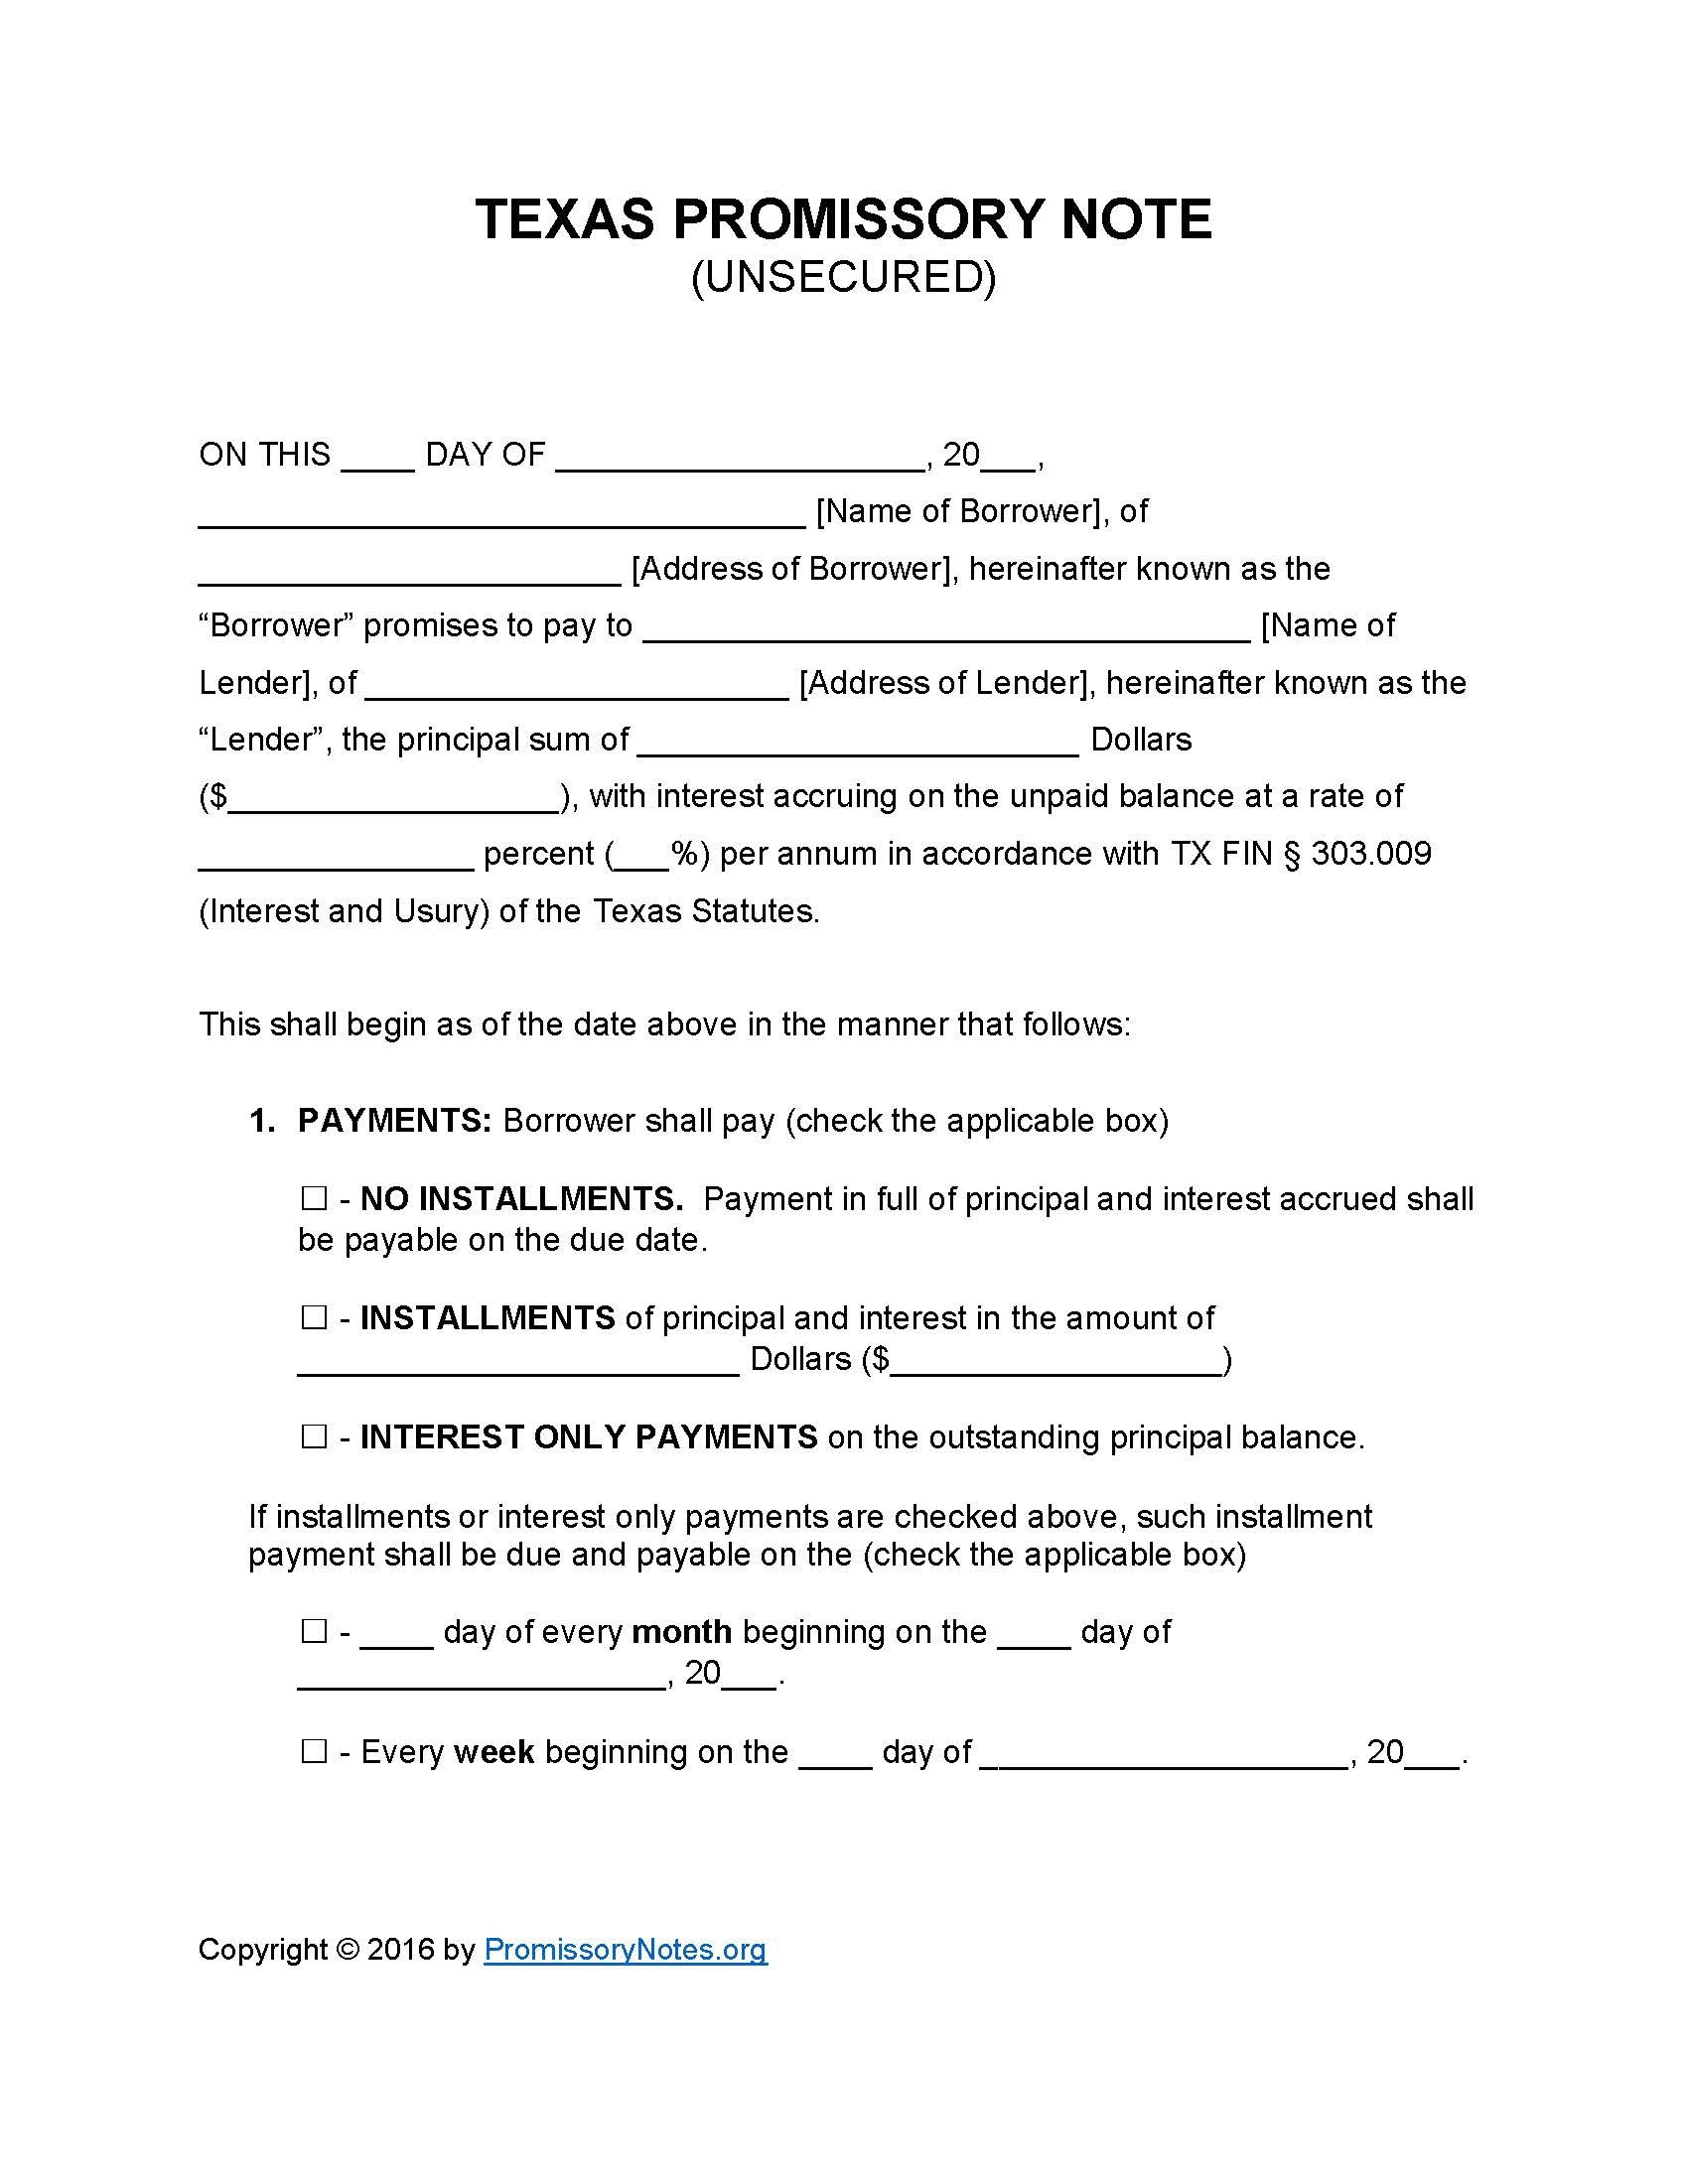 Texas Unsecured Promissory Note Template  Promissory Notes for Free Installment Promissory Note Template